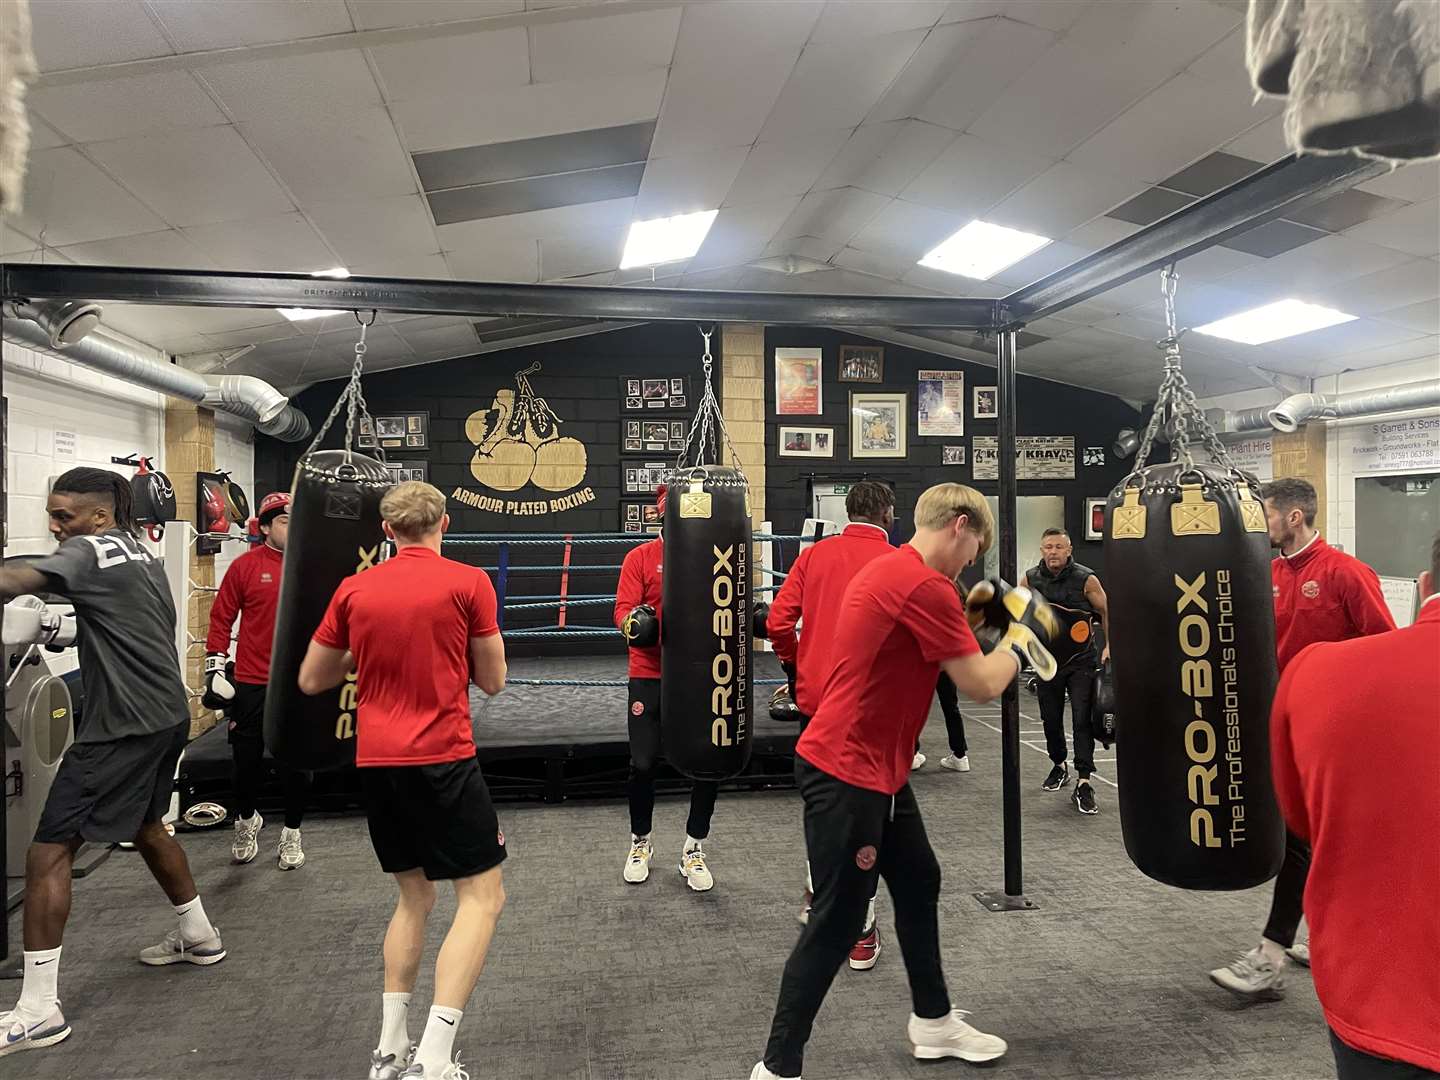 Chatham Town doing boxing workout with Johnny Armour at the Armour Plated Boxing gym